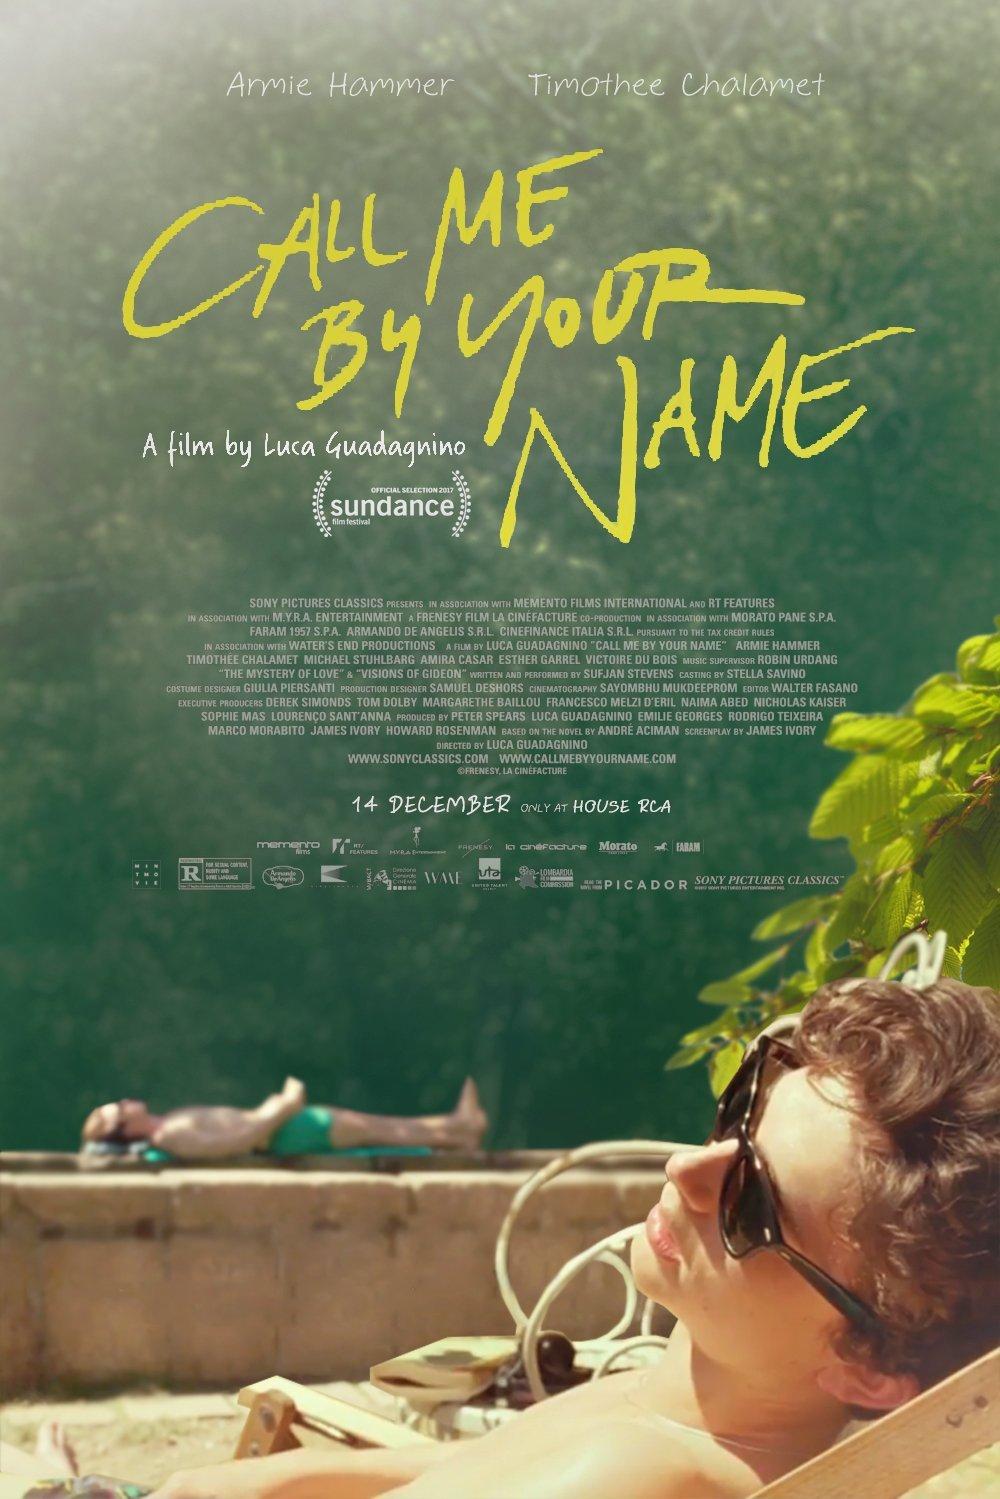 Poster phim Call Me By Your Name. Ảnh: Internet